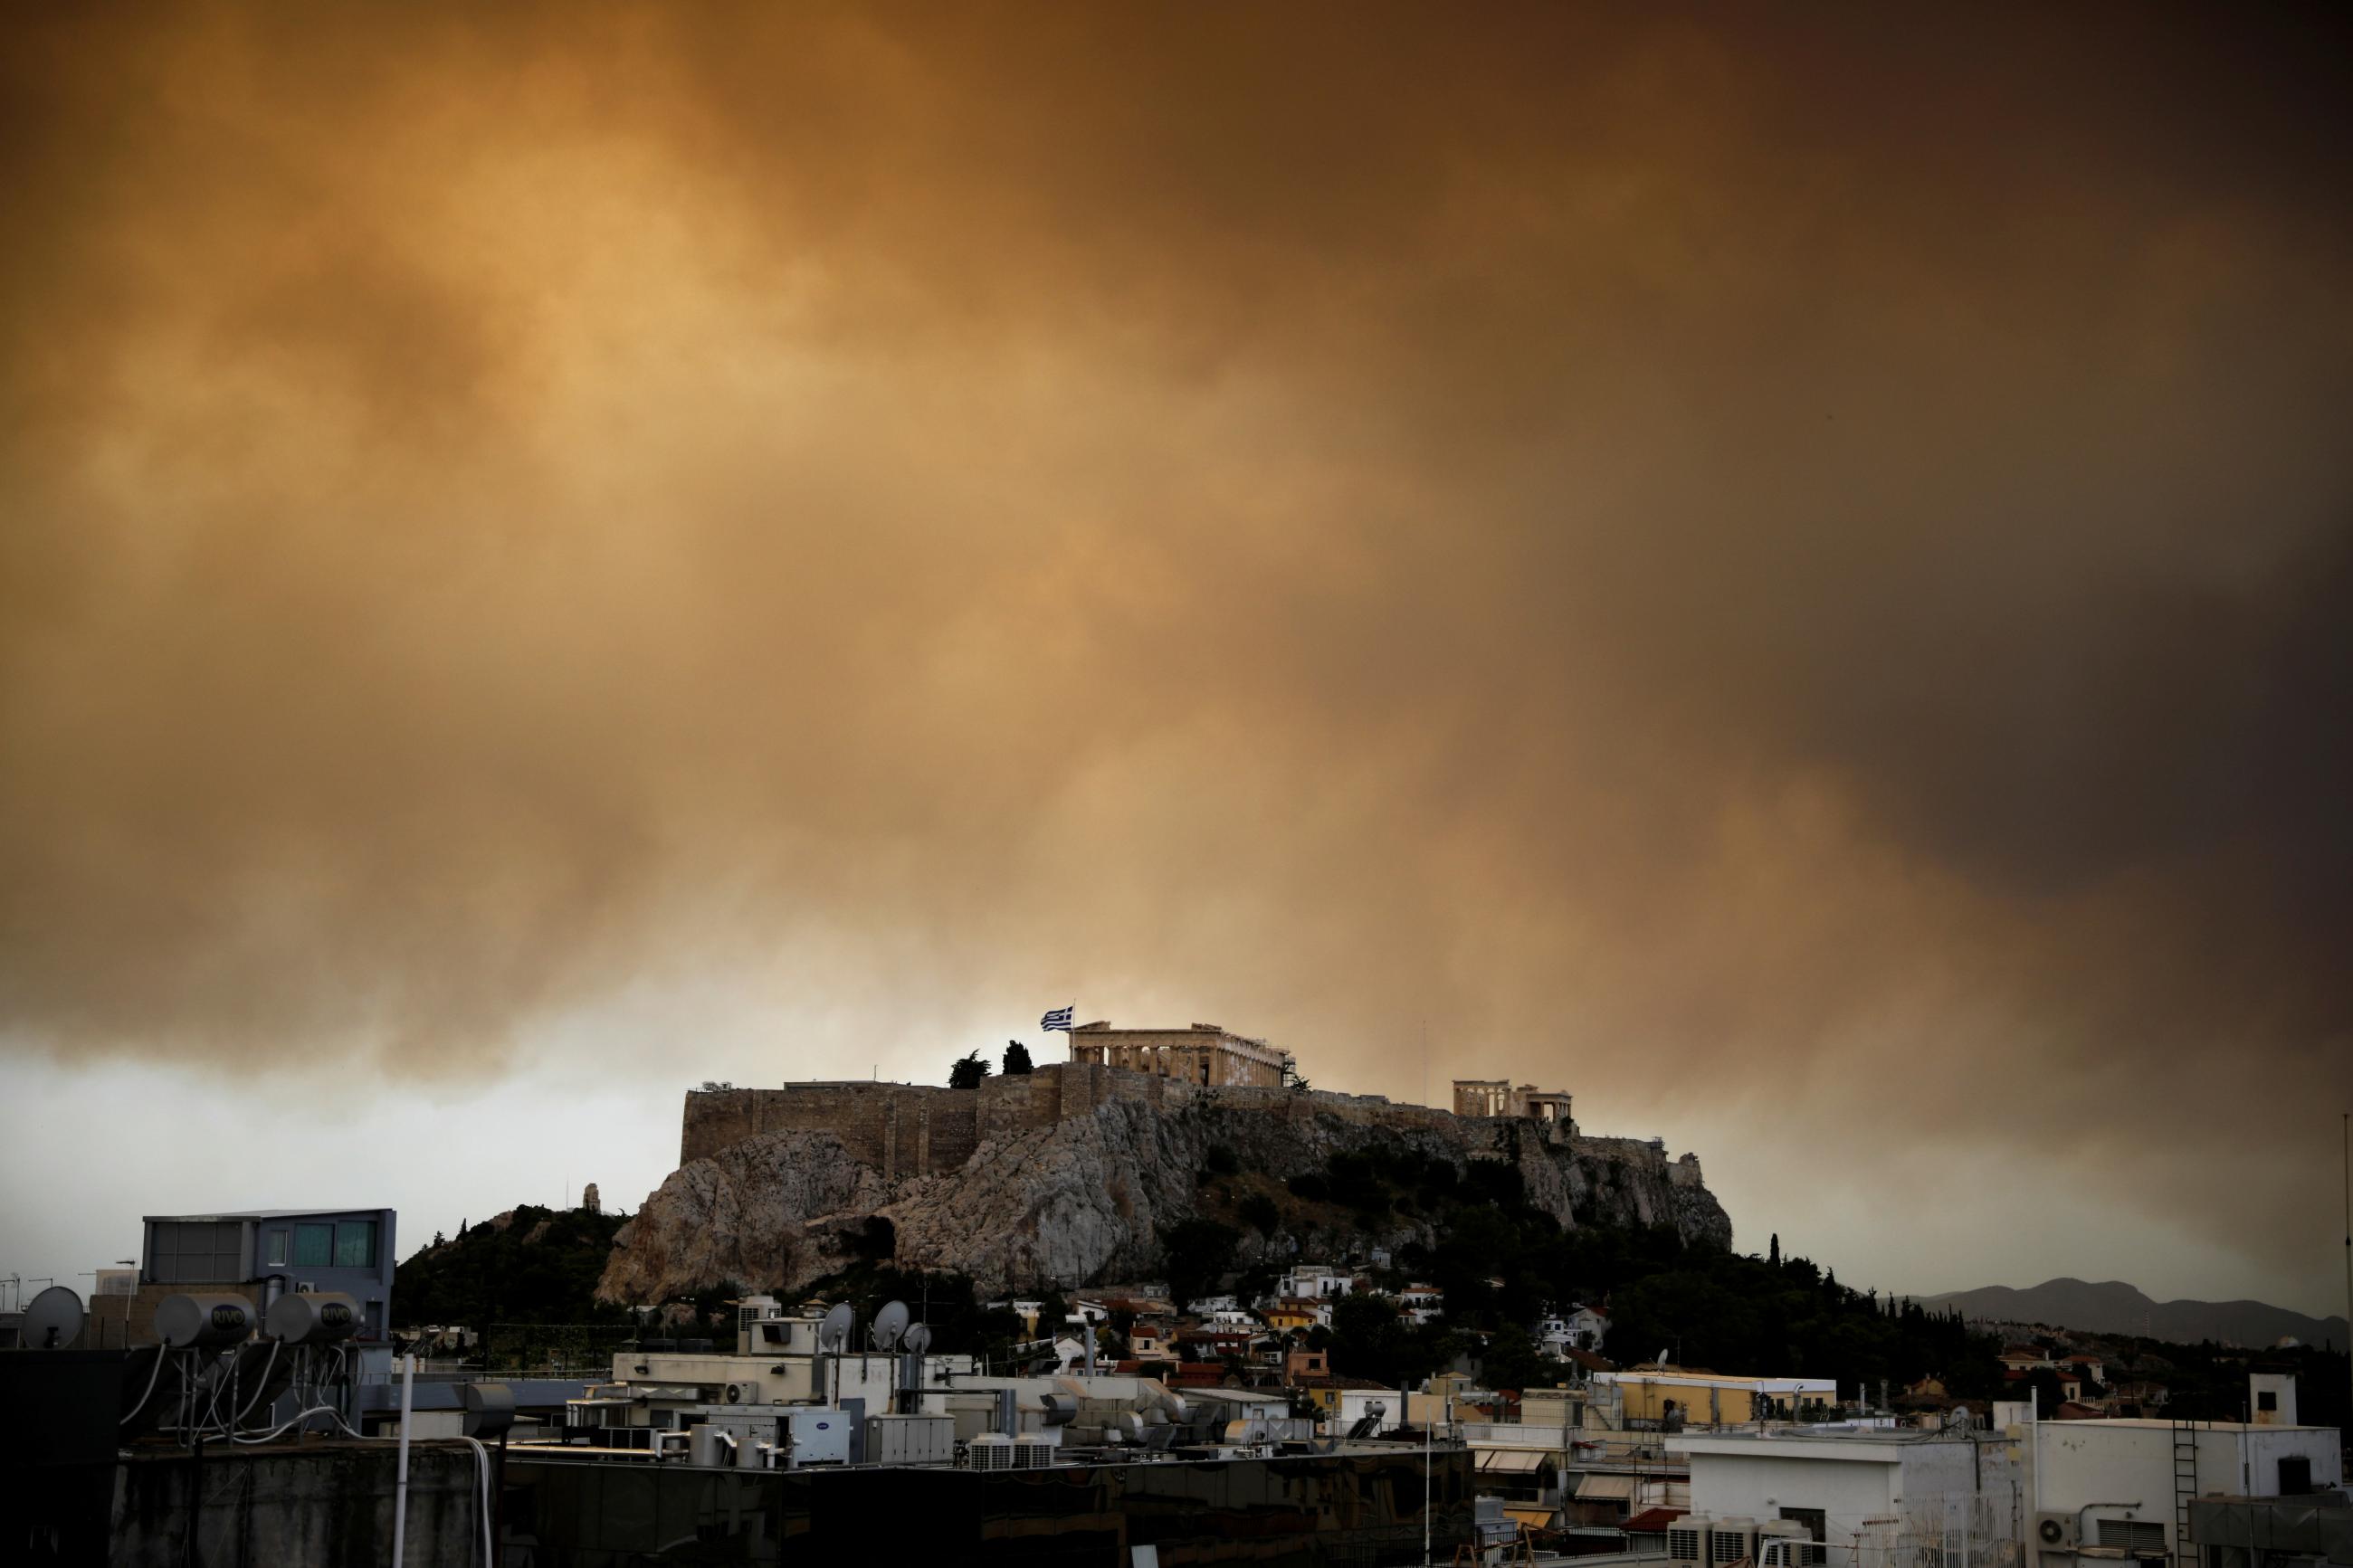 Smoke from a wildfire burning outside Athens is seen over the Parthenon temple atop the Acropolis hill in Athens, Greece, on July 23, 2018. 